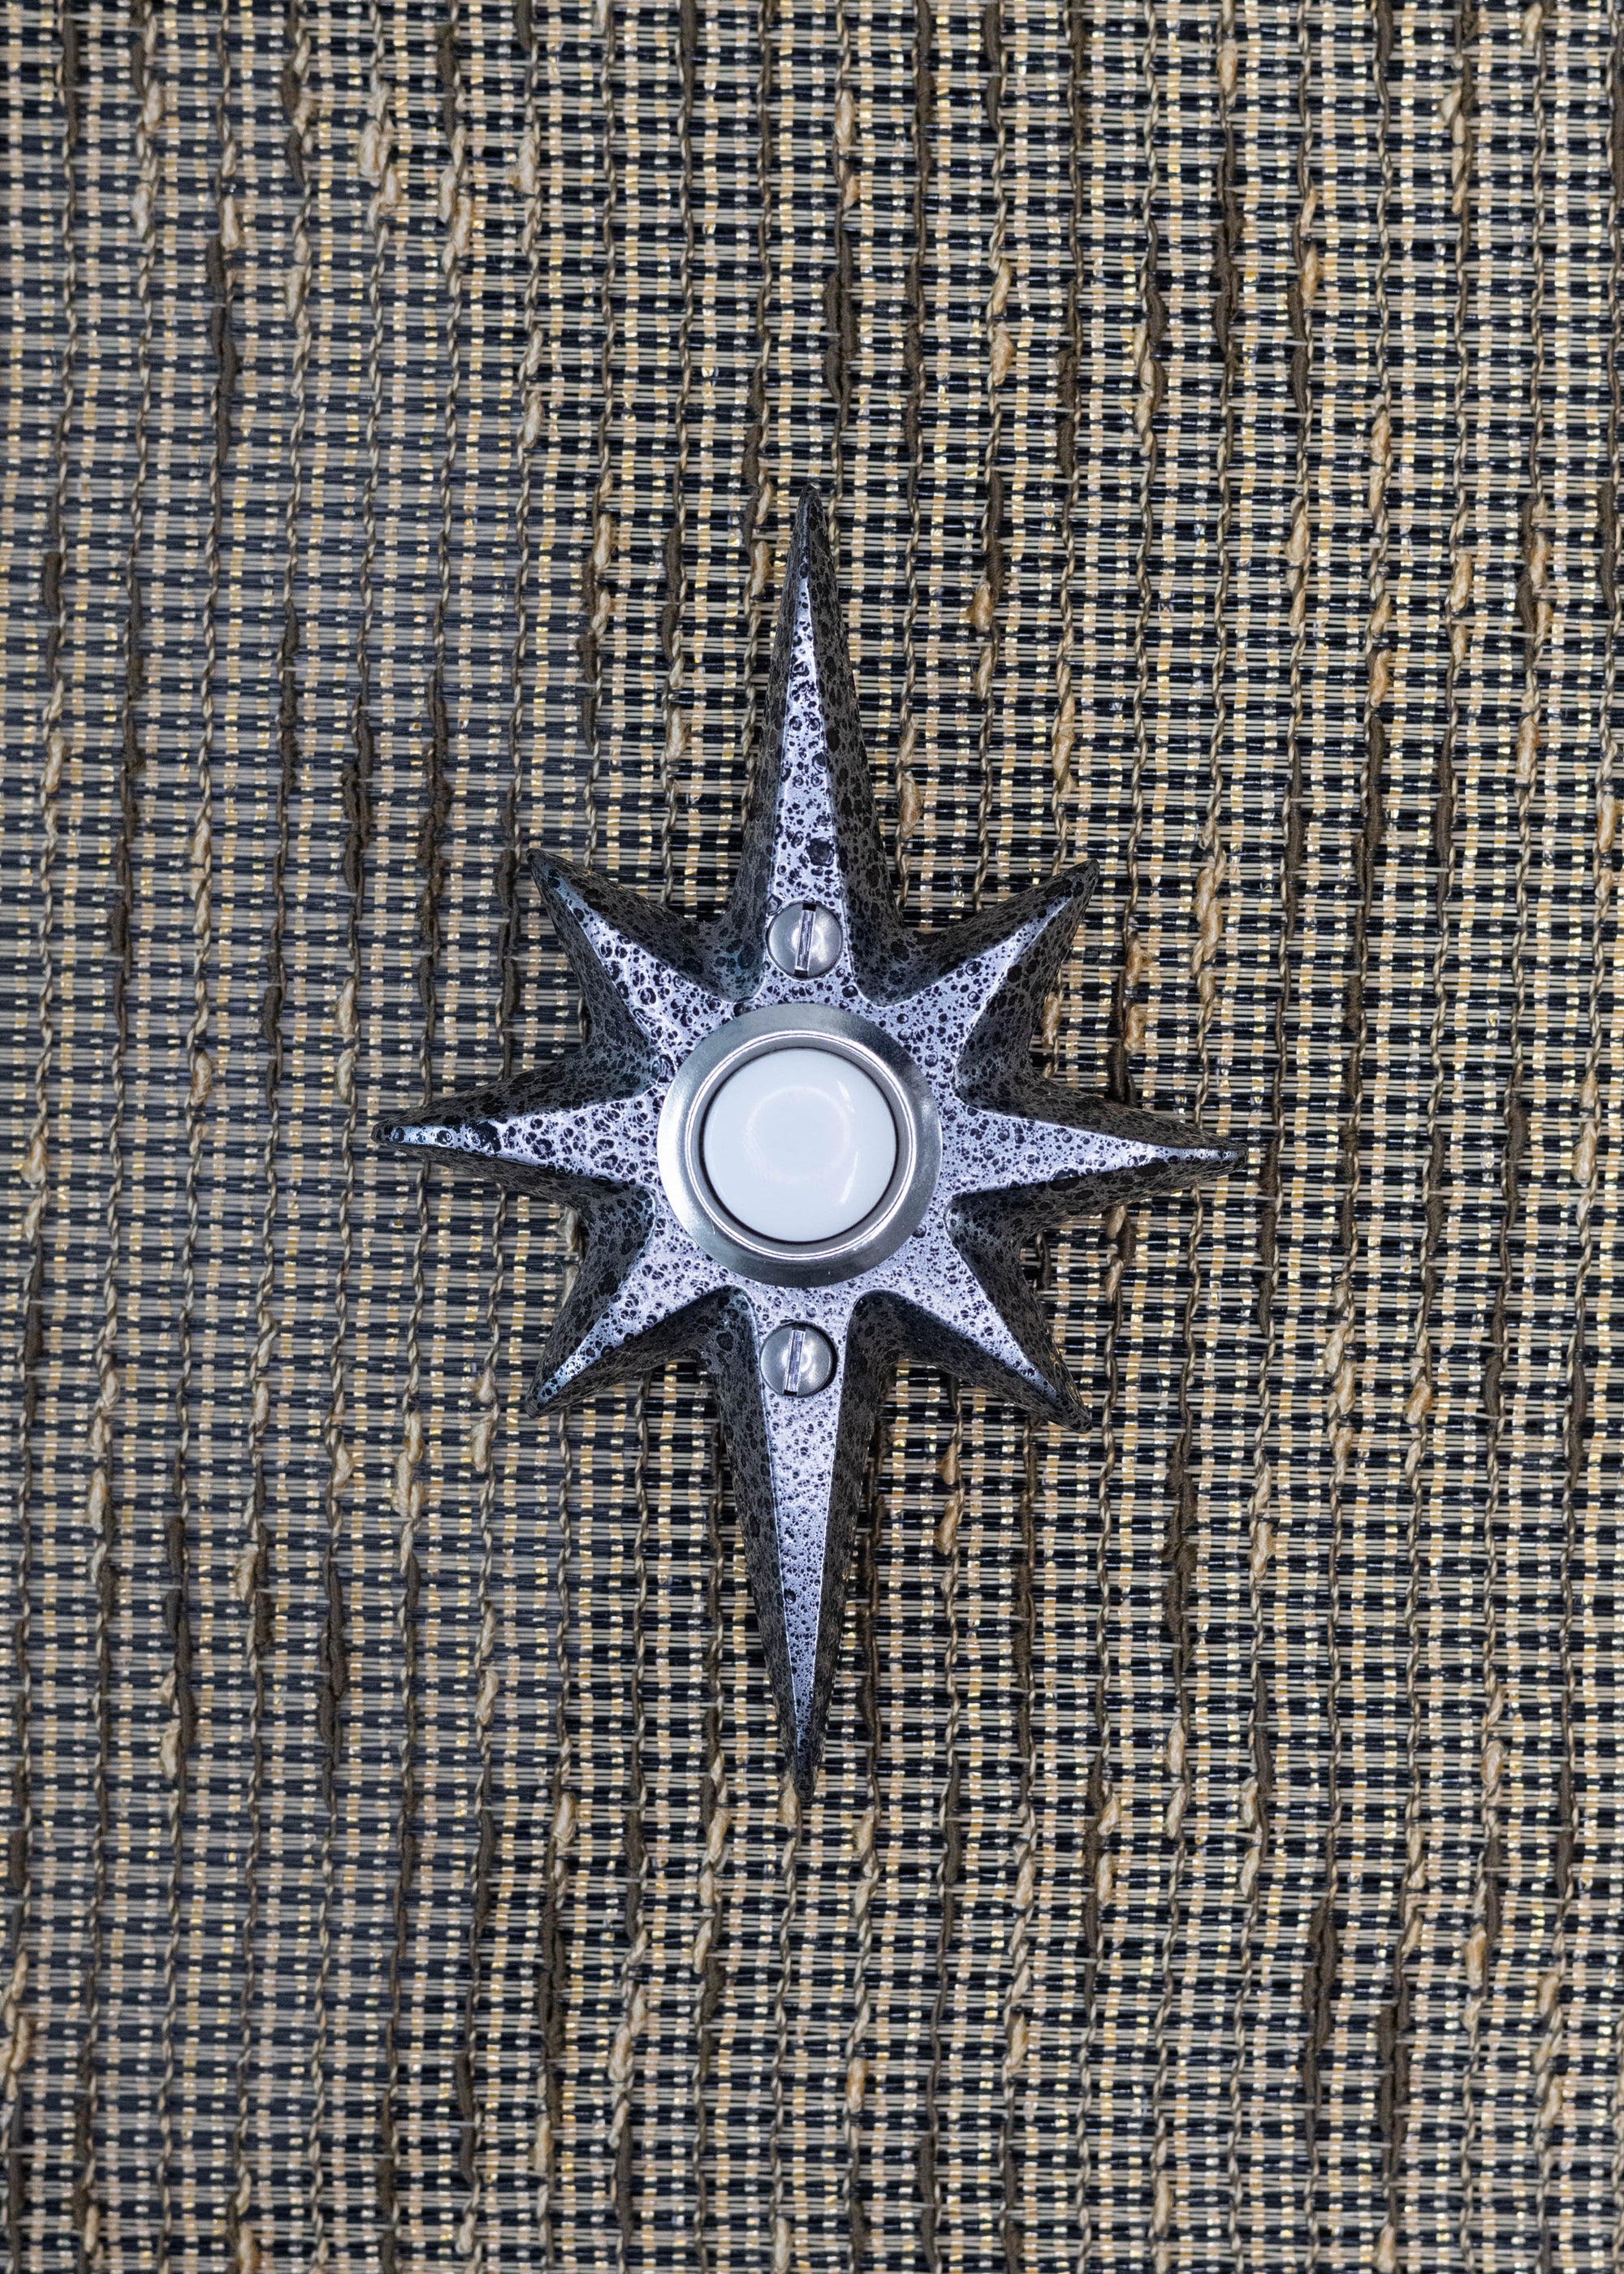 A small black frost powder coated cast aluminum starburst doorbell button. The powder coating is a darker silver with black pitted texture. It has a nice metallic shine to it. The doorbell button is a white plastic with a silver rim. There are two silver screws, one above and below the doorbell.